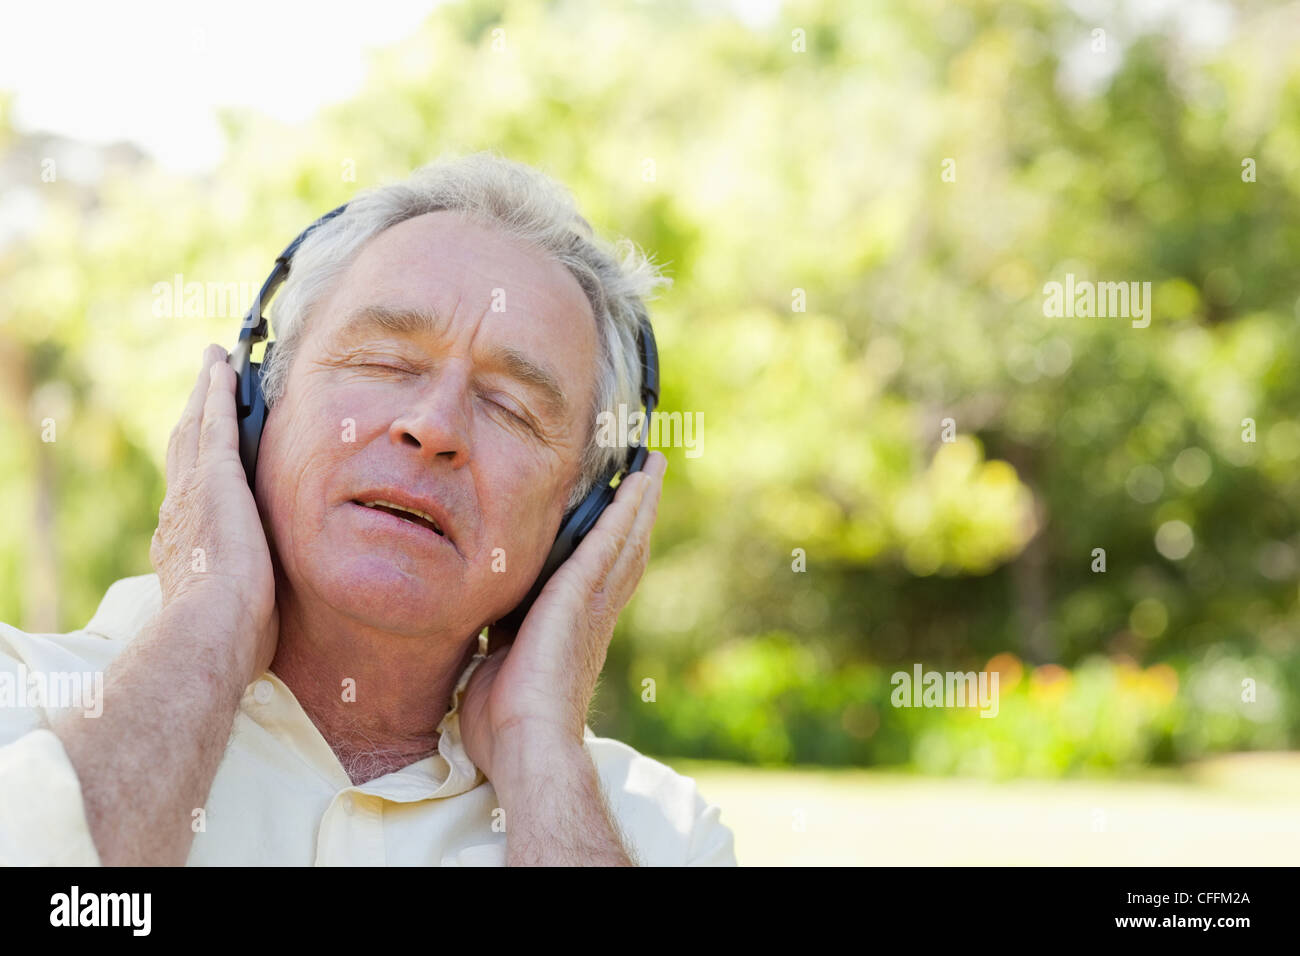 Man with his eyes closed thoughtfully listening to music Stock Photo